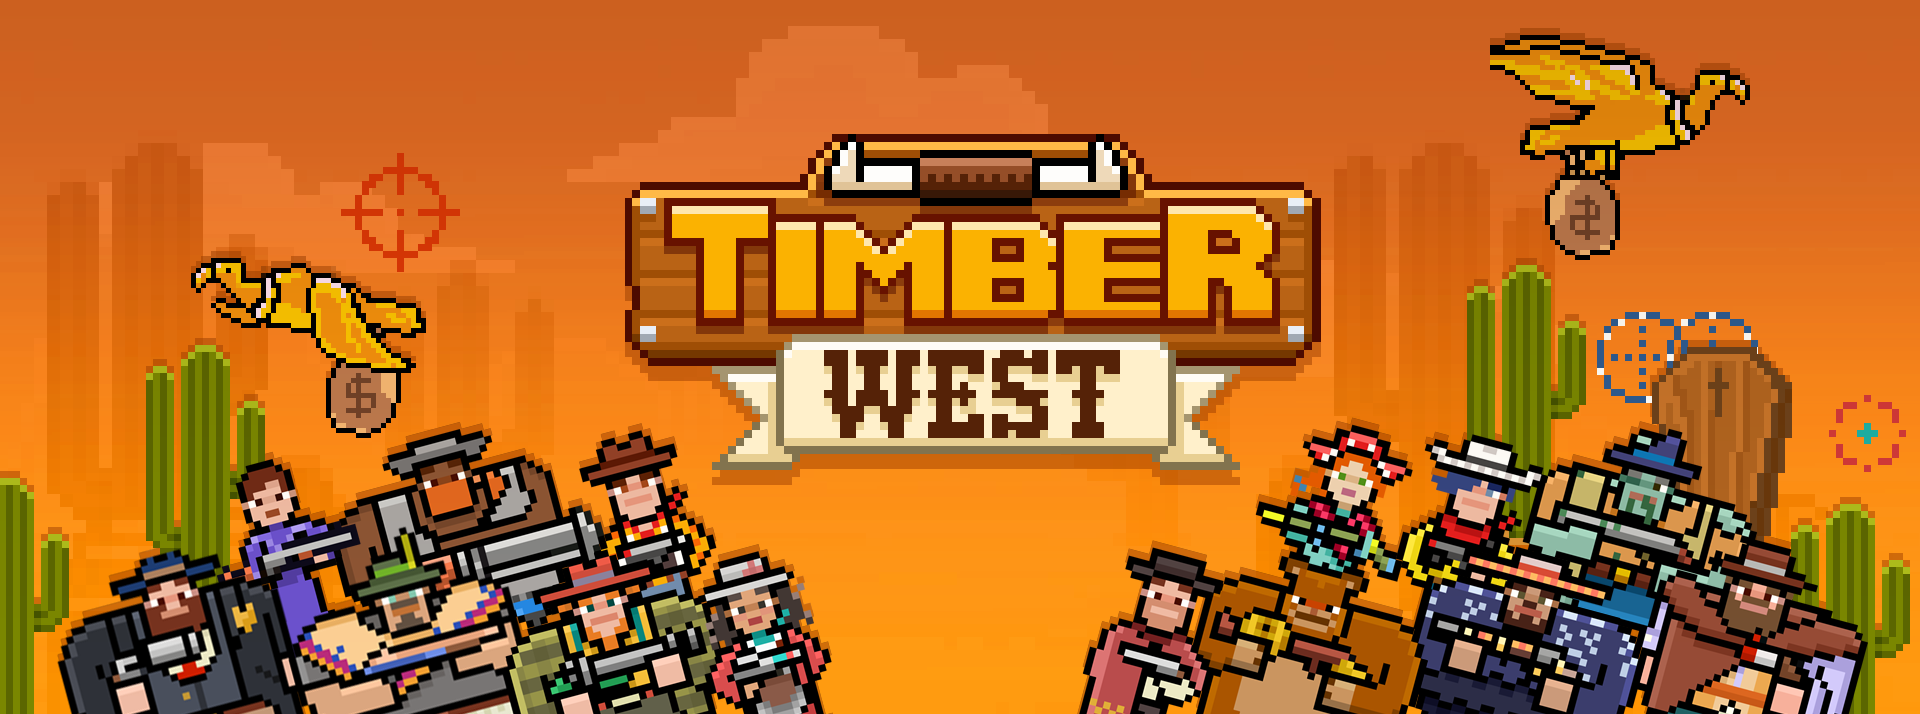 Banner of Timber West - 狂野西部街機射擊遊戲 